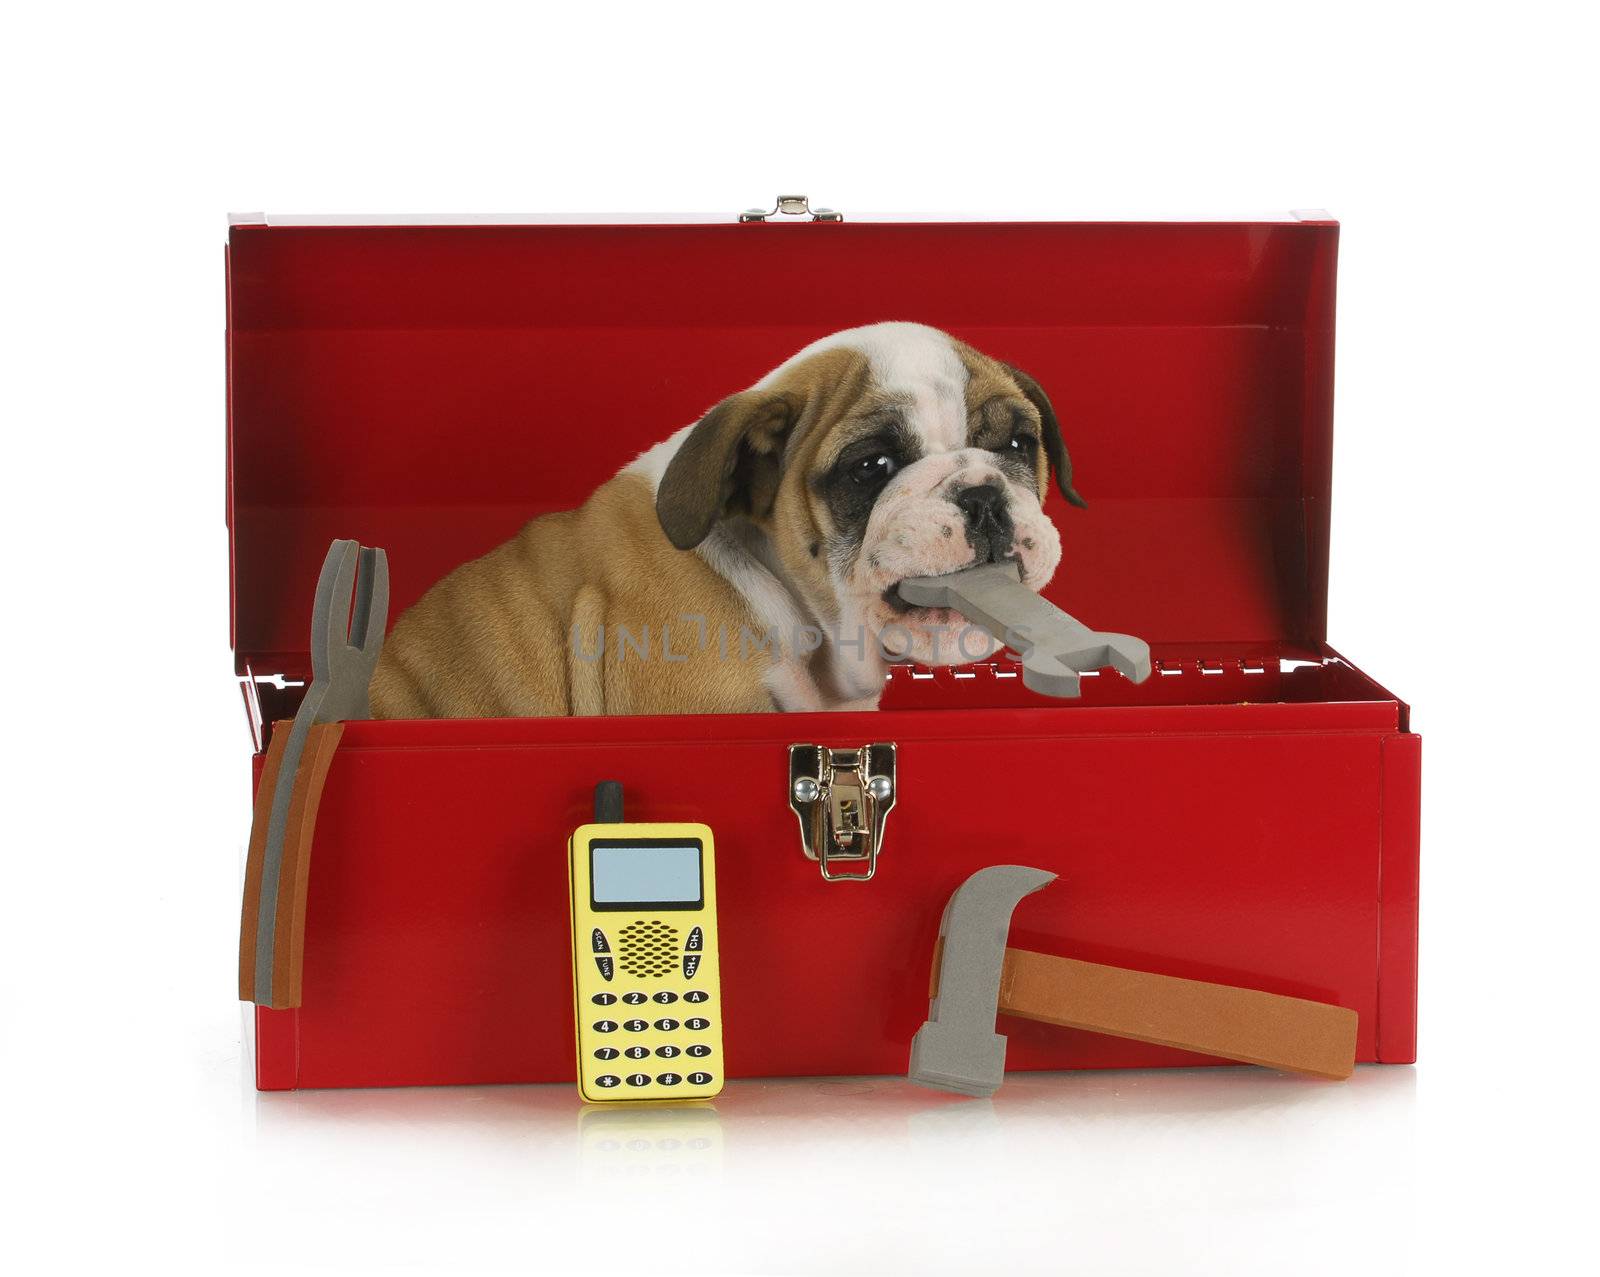 working dog - english bulldog puppy sitting in a tool box holding a wrench